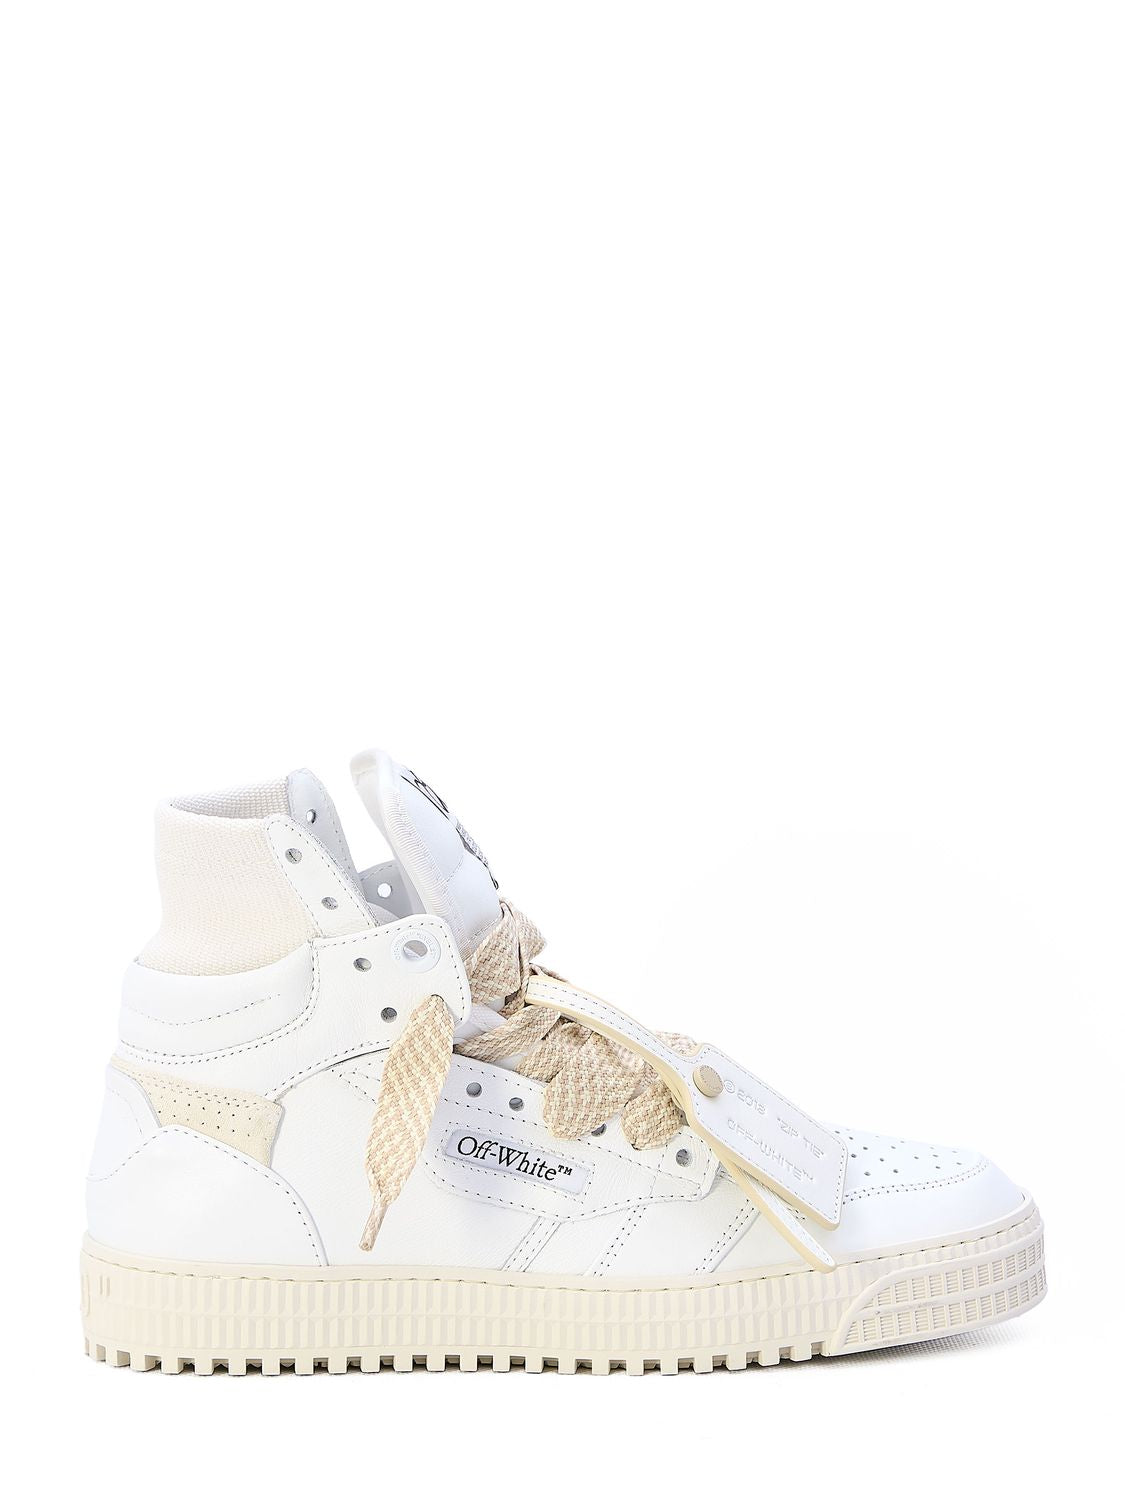 OFF-WHITE Men's White Leather Sneaker with Cream Rubber Sole and Detachable Zip-Tie Detail